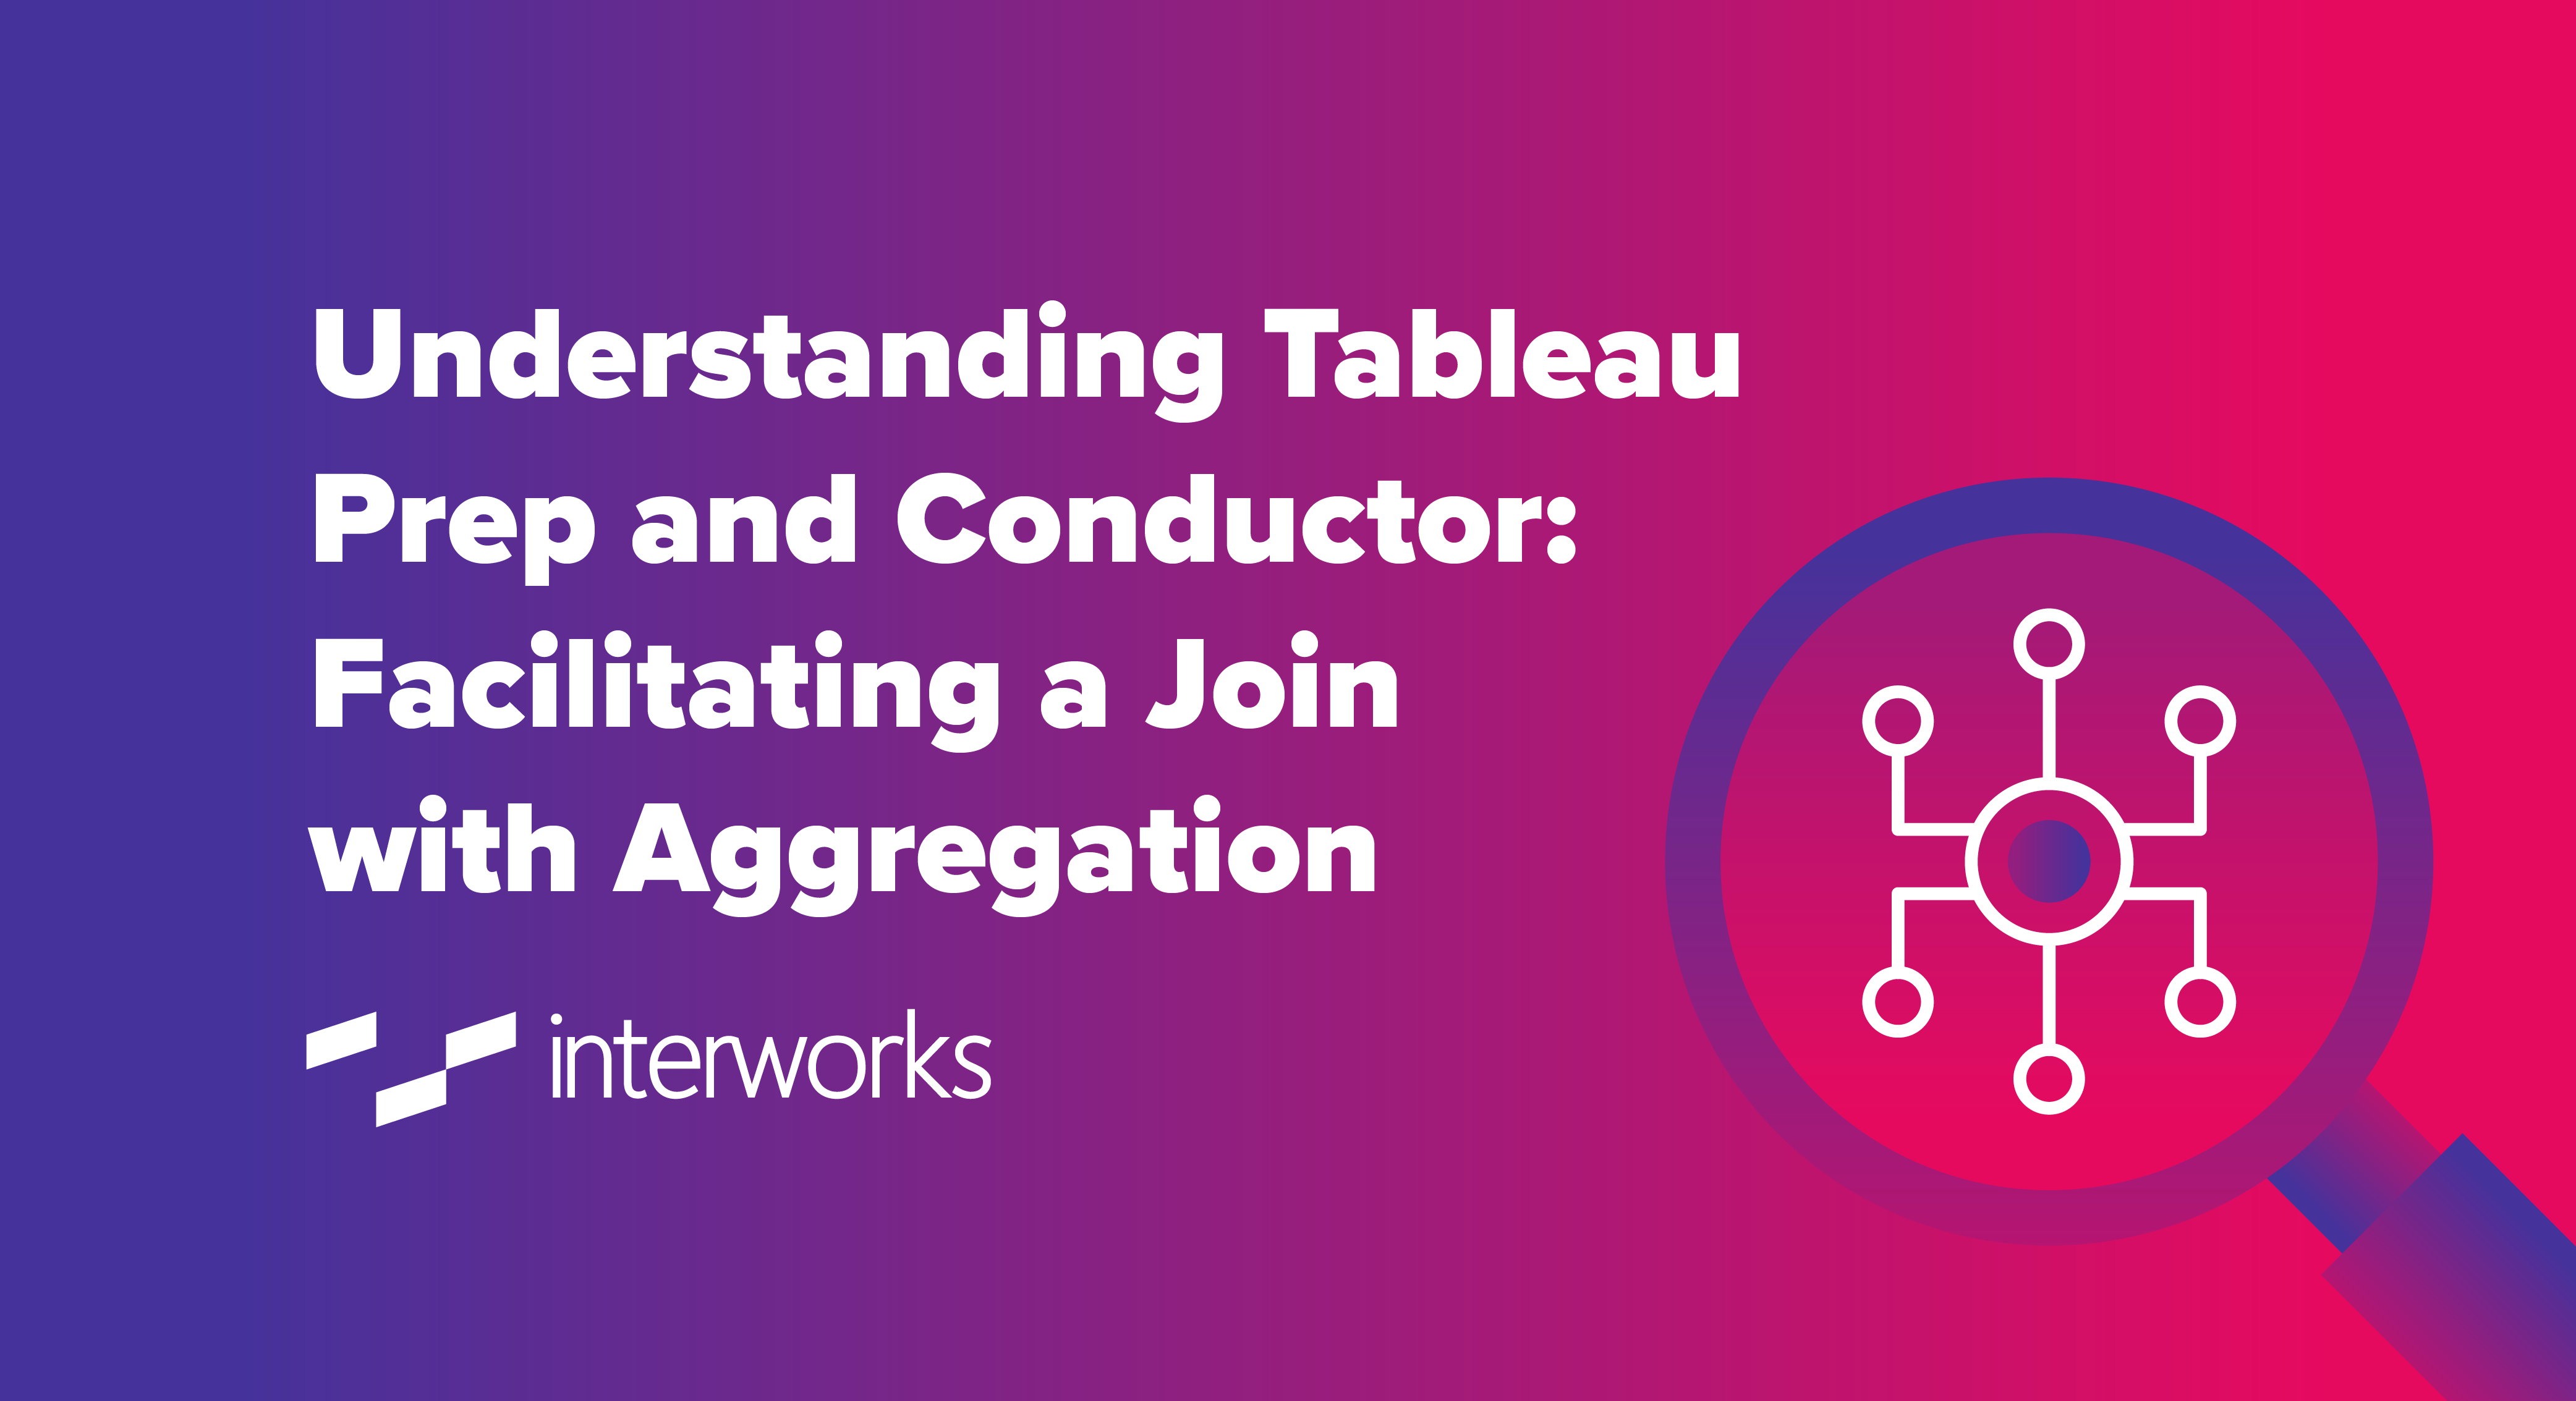 Understanding Tableau Prep and Conductor: Facilitating a Join with Aggregation